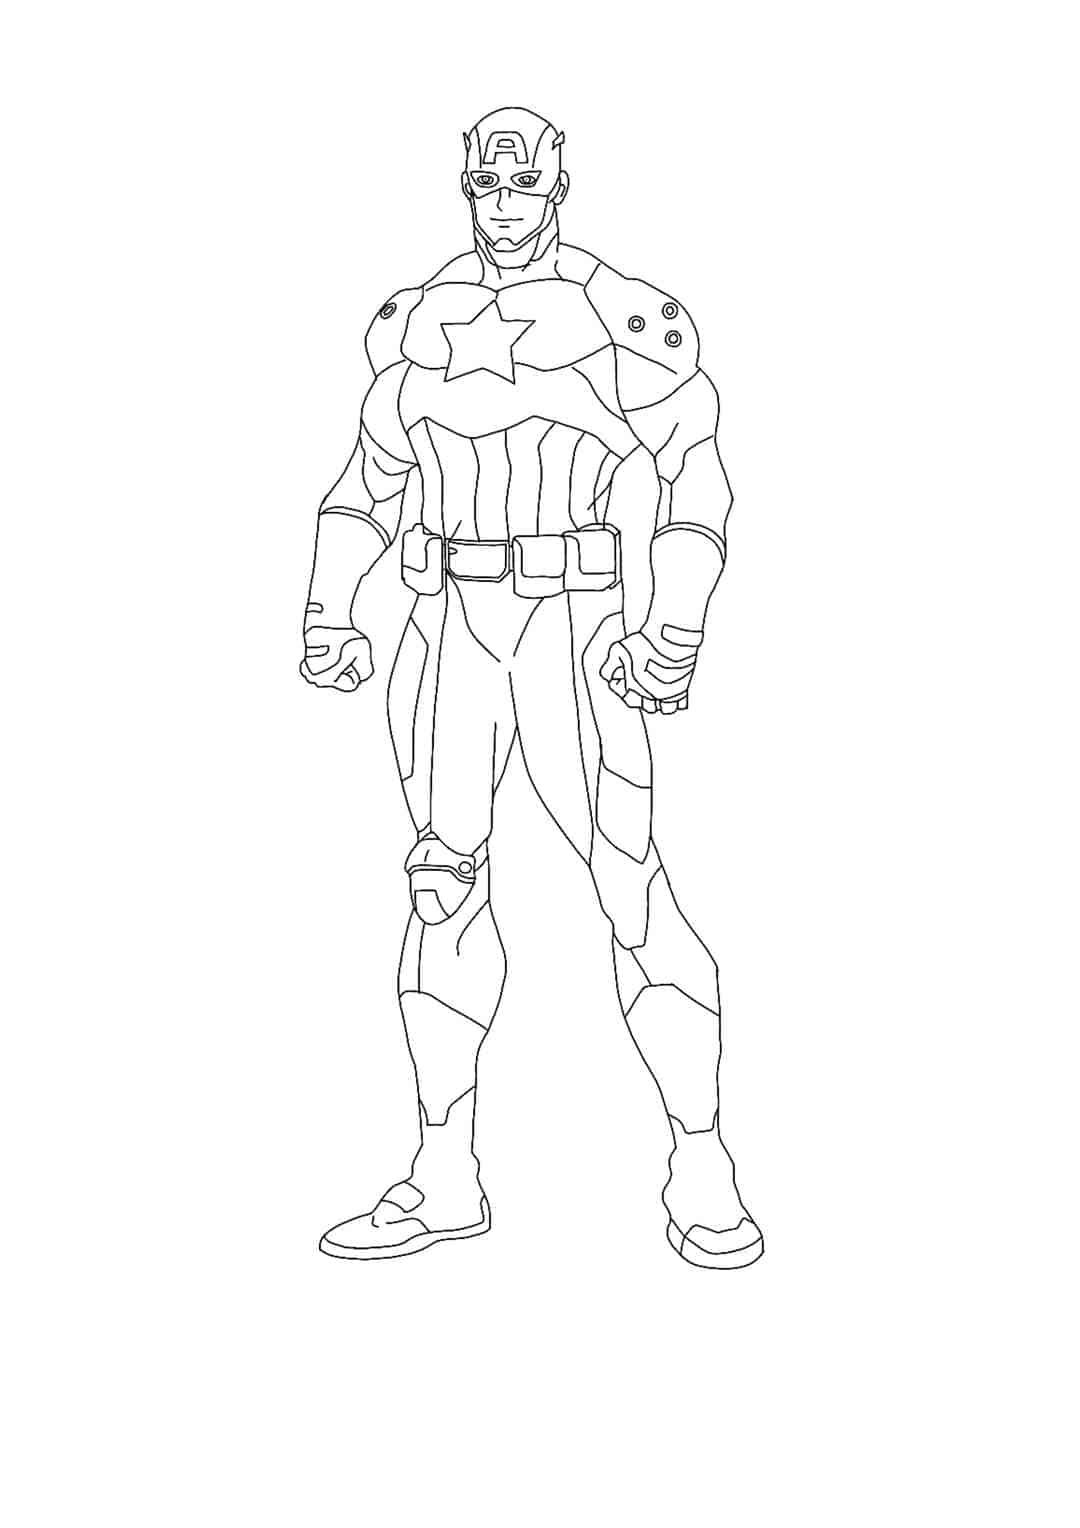 Captain America coloring page